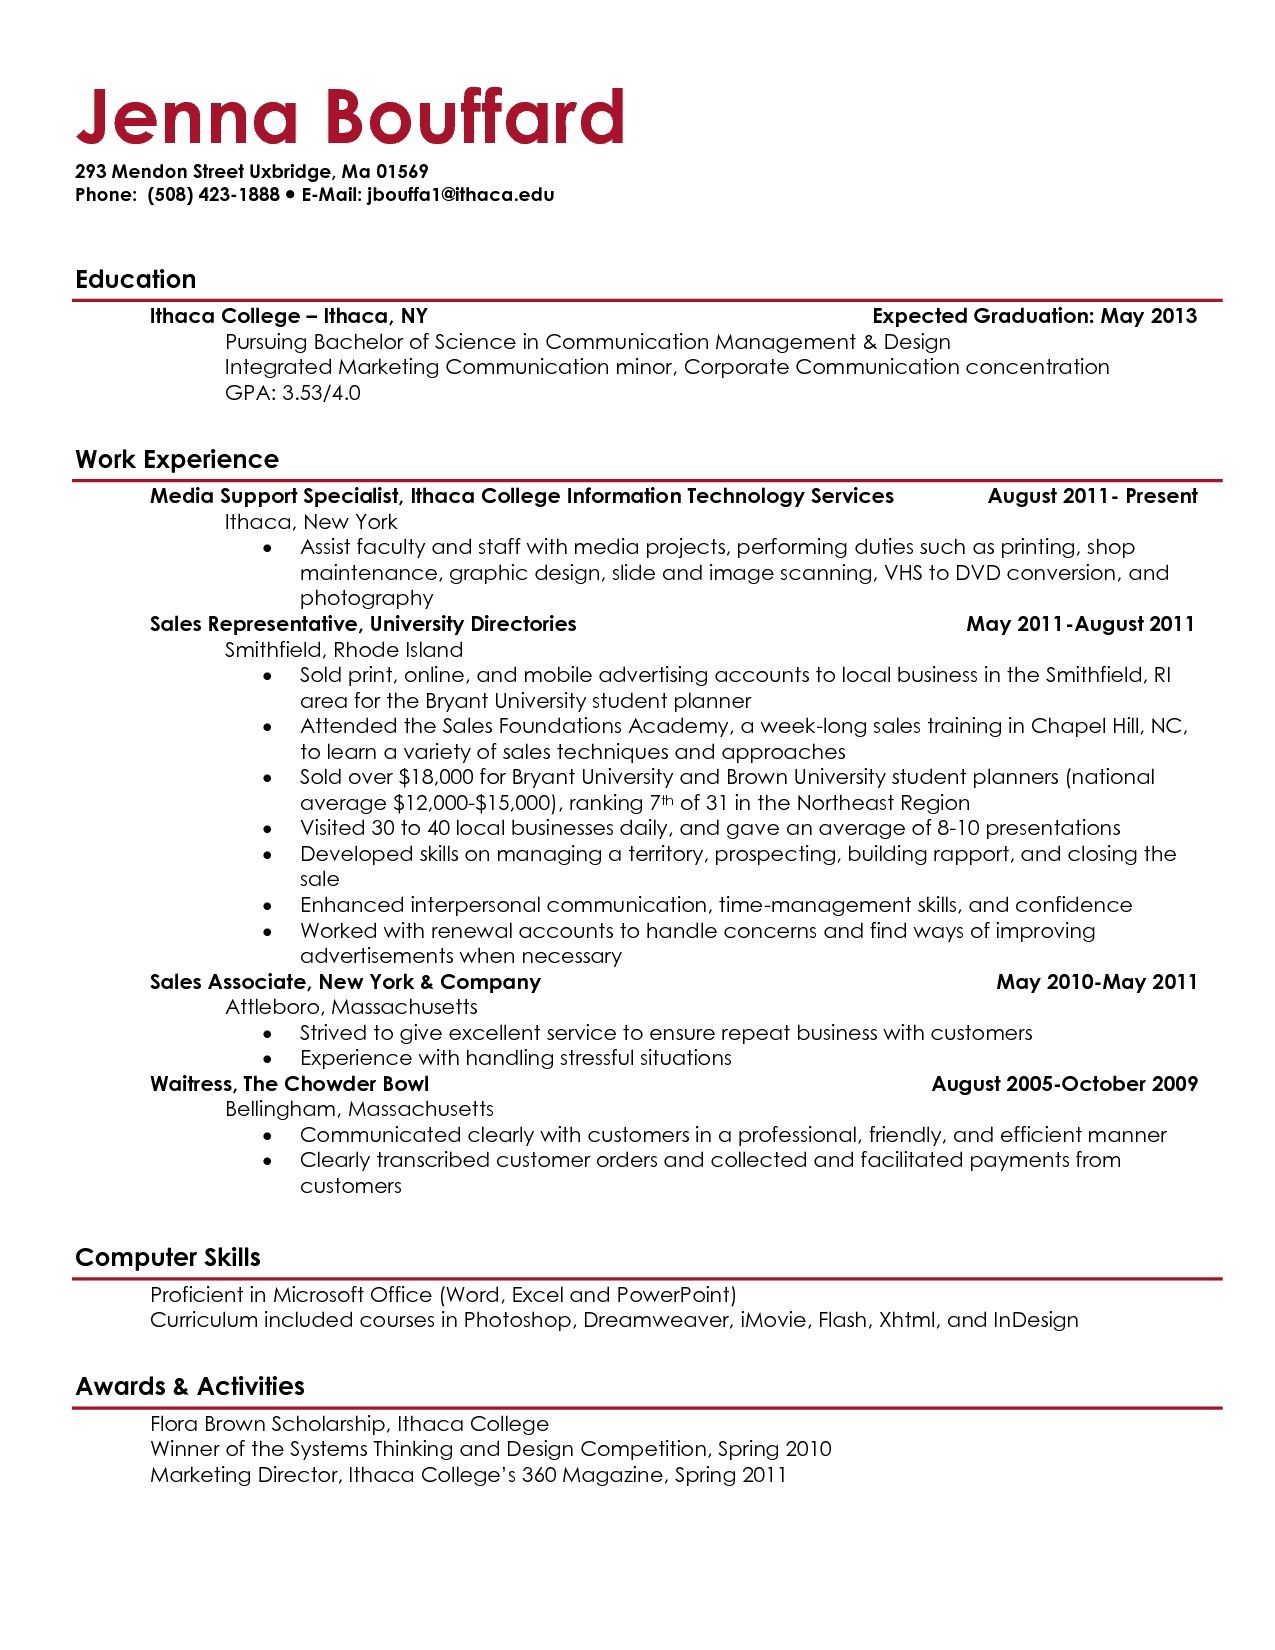 Resume Template Examples for College Students the Most Job Resume Examples for College Students – Resume …